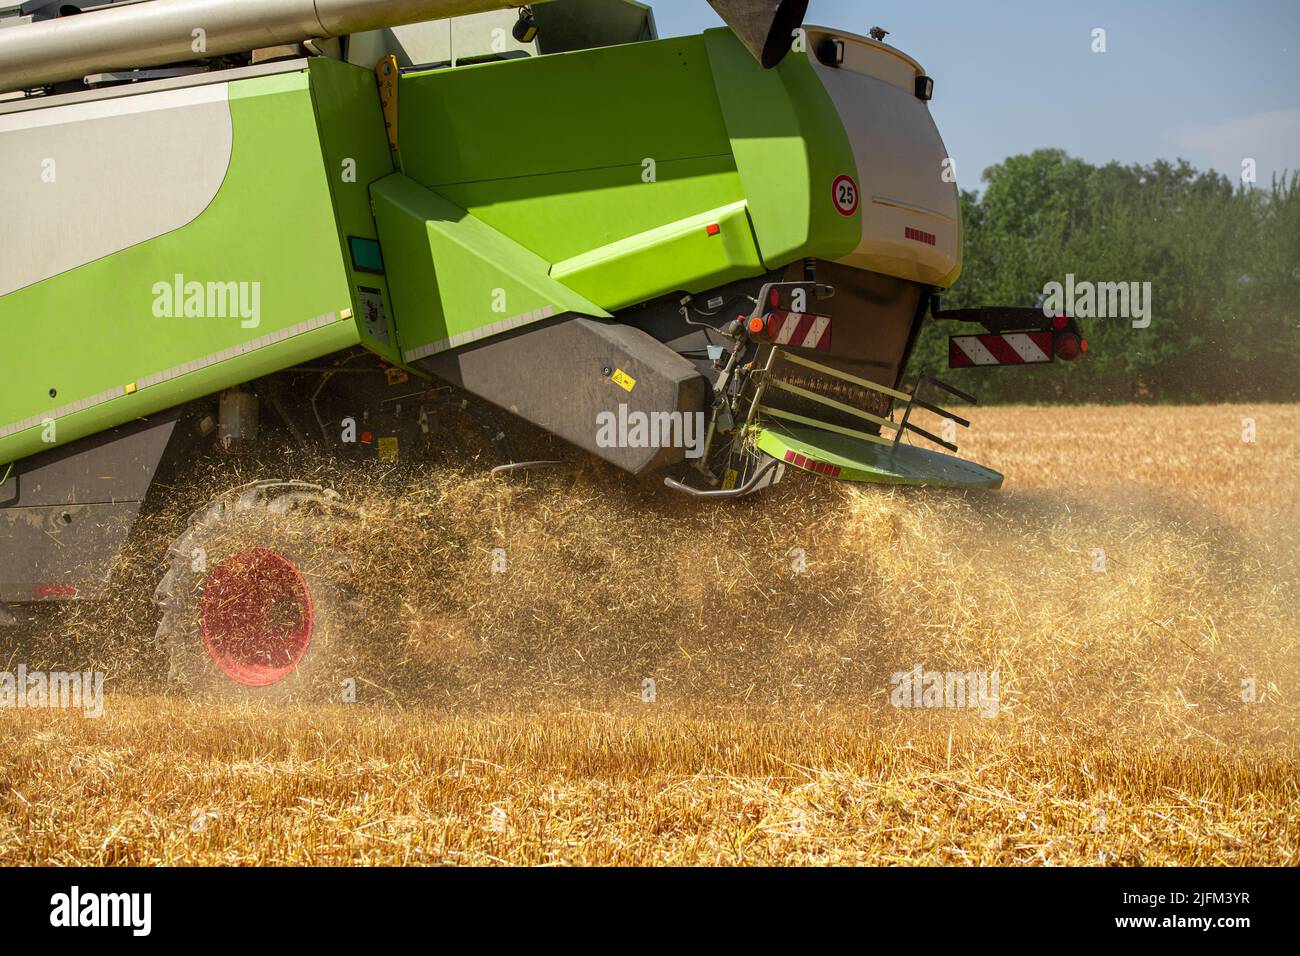 Combine harvester at work during wheat harvest. Wheat supply shortage, global food crisis, stockpiling. Stock Photo